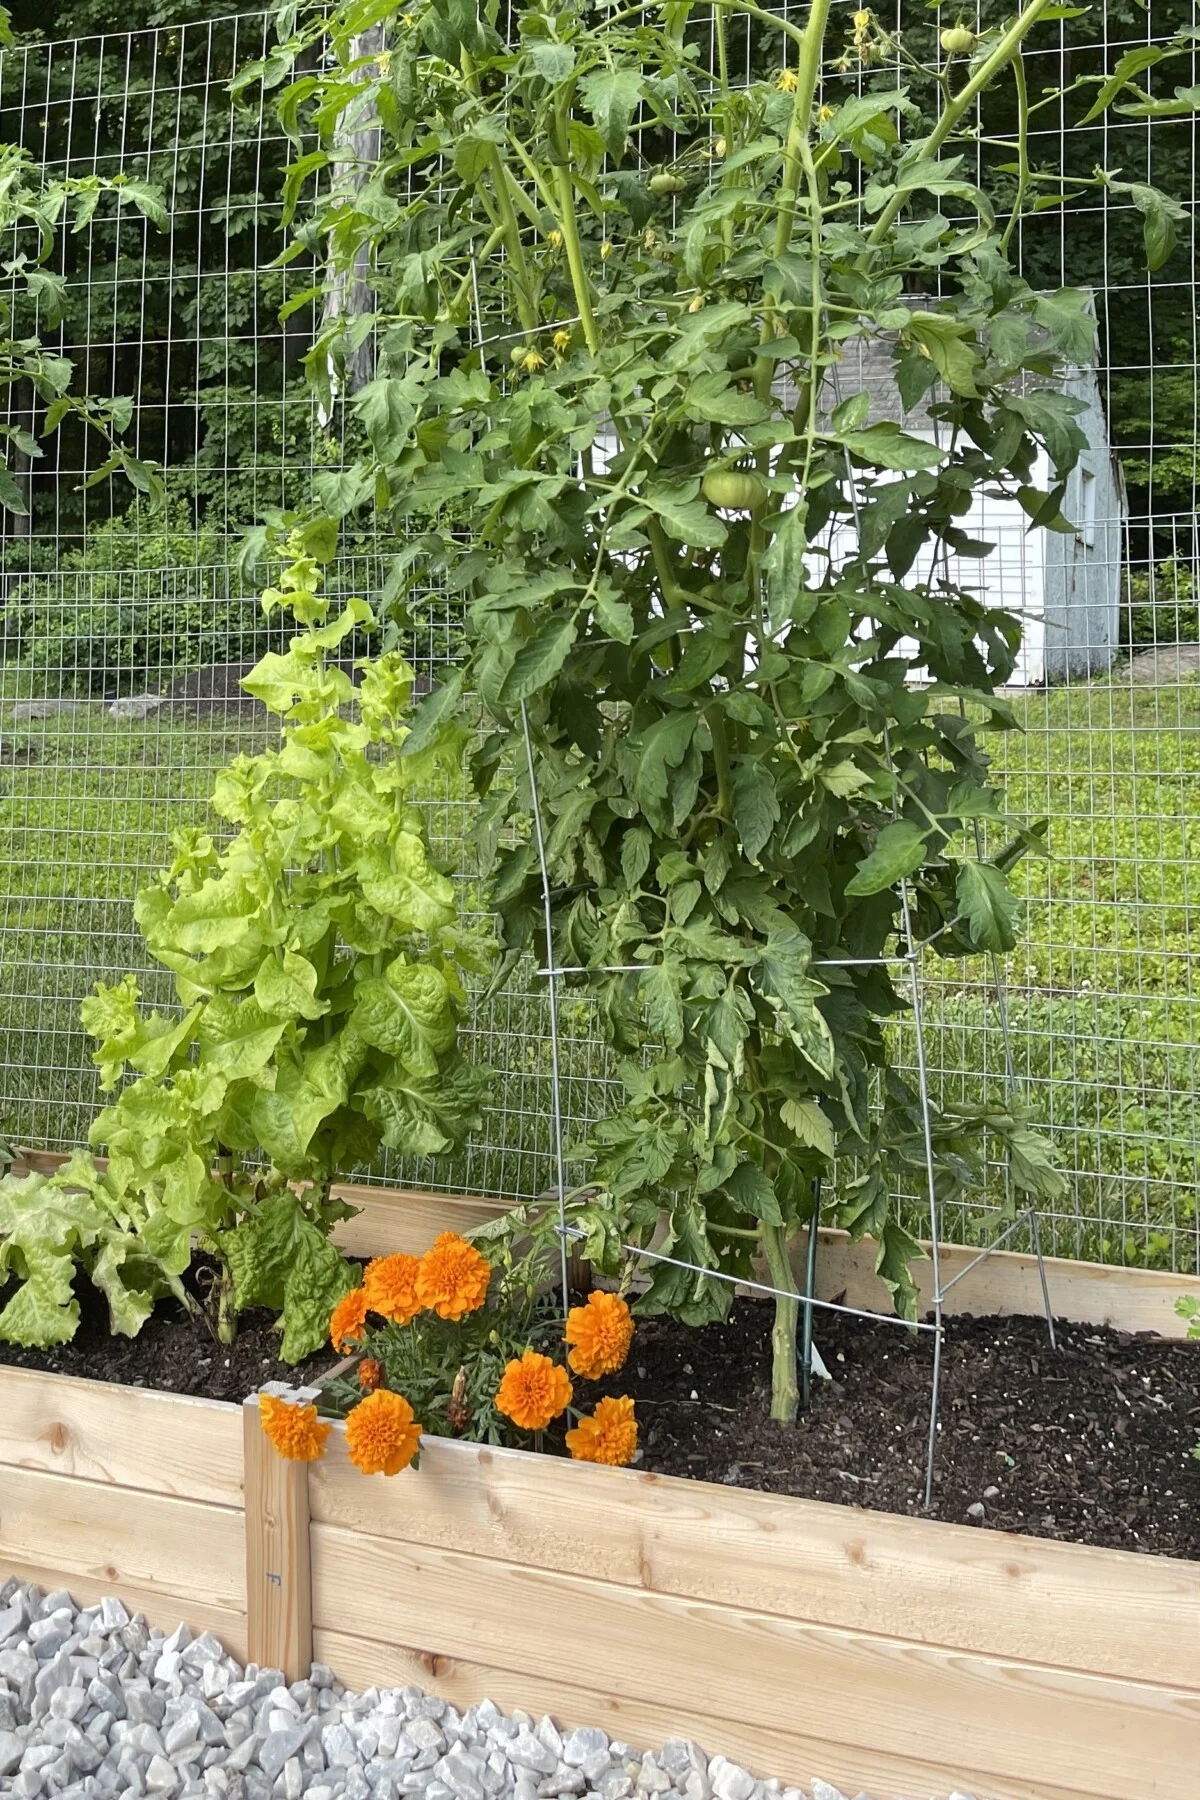 Tomatoes and marigolds